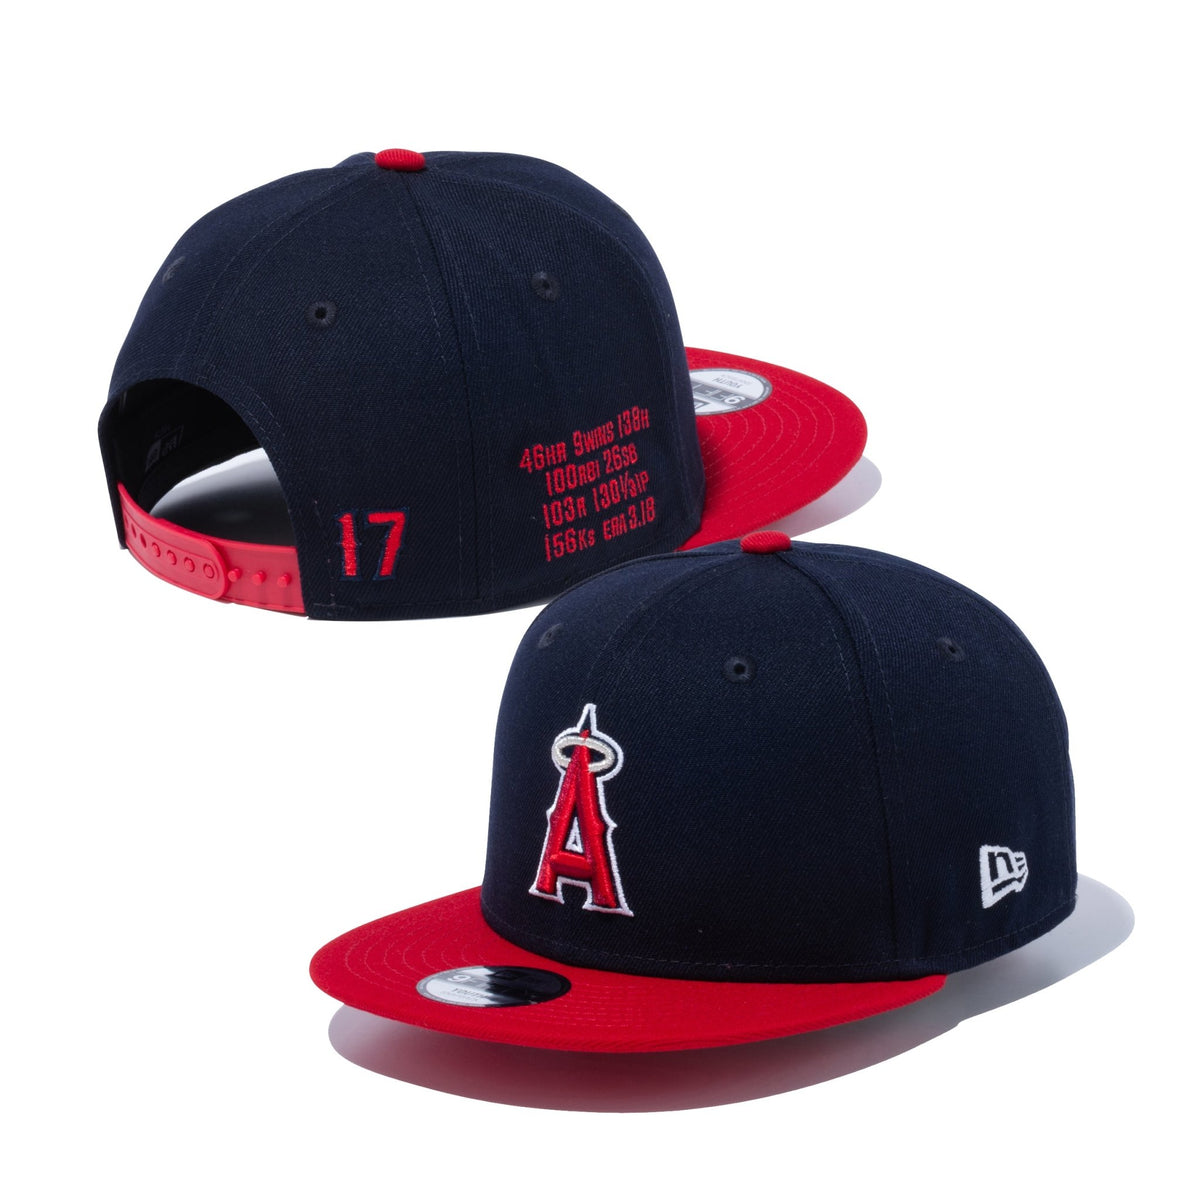 Youth 9FIFTY Shohei Ohtani 2021 Season Memorial Collection ロサンゼルス・エンゼルス スタッツ